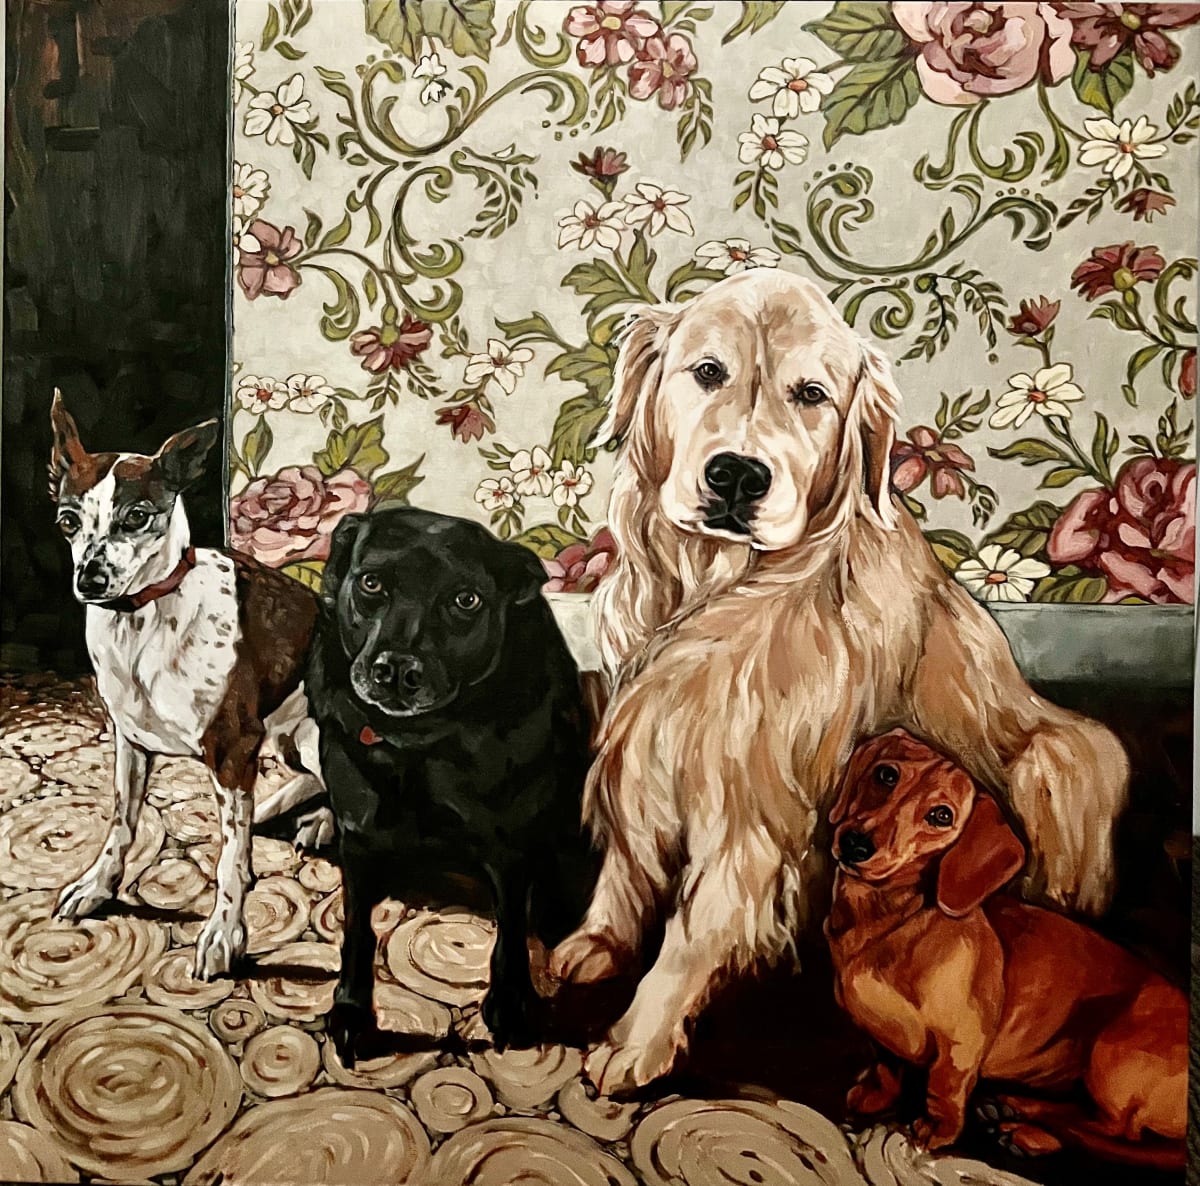 Puppy Love by Kim Harding  Image: "Puppy Love" 73 x 73cm Oil on Canvas